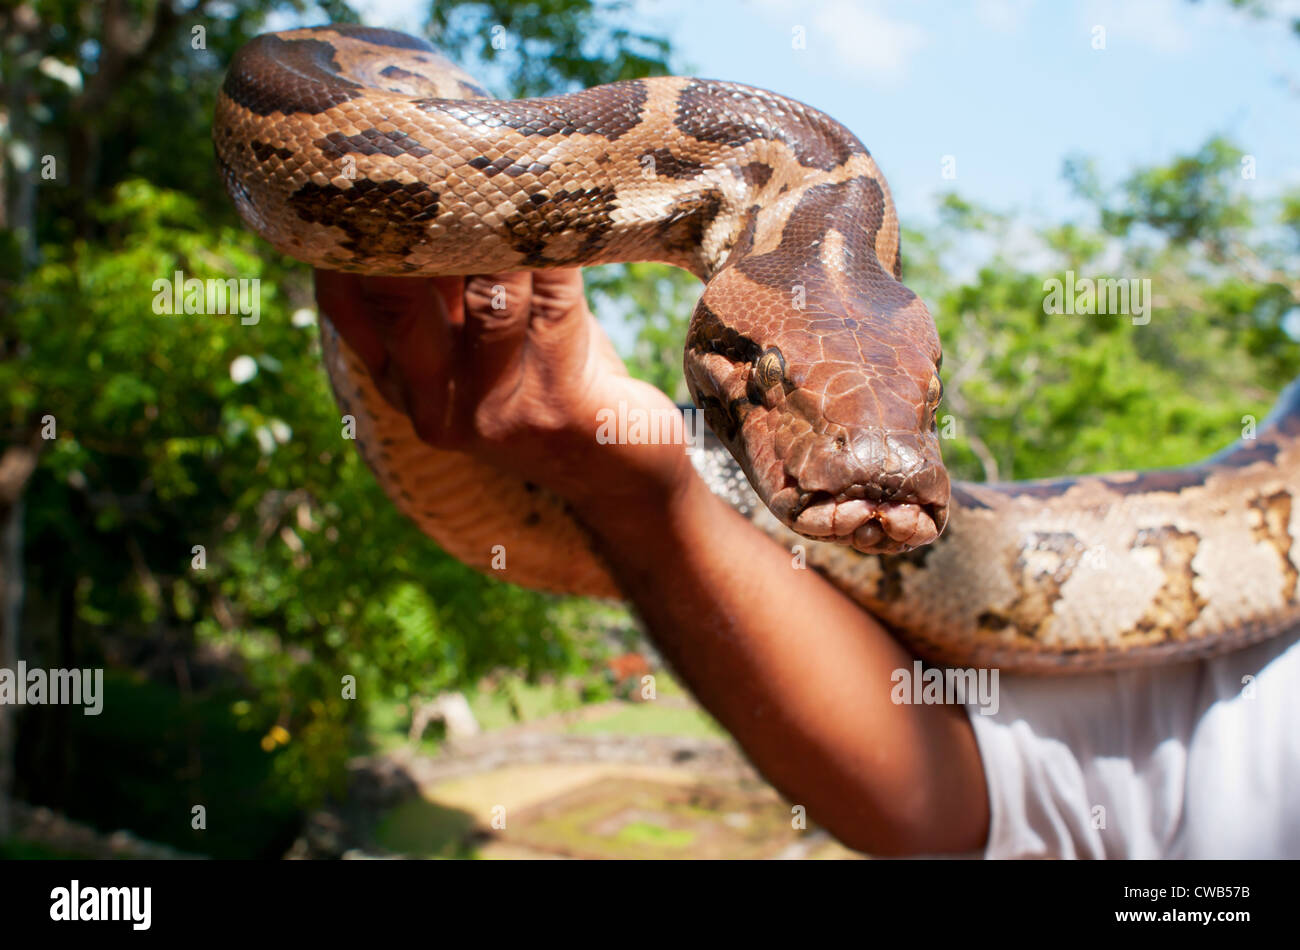 Hand-reared python in male hand. Focus on the snake. Stock Photo